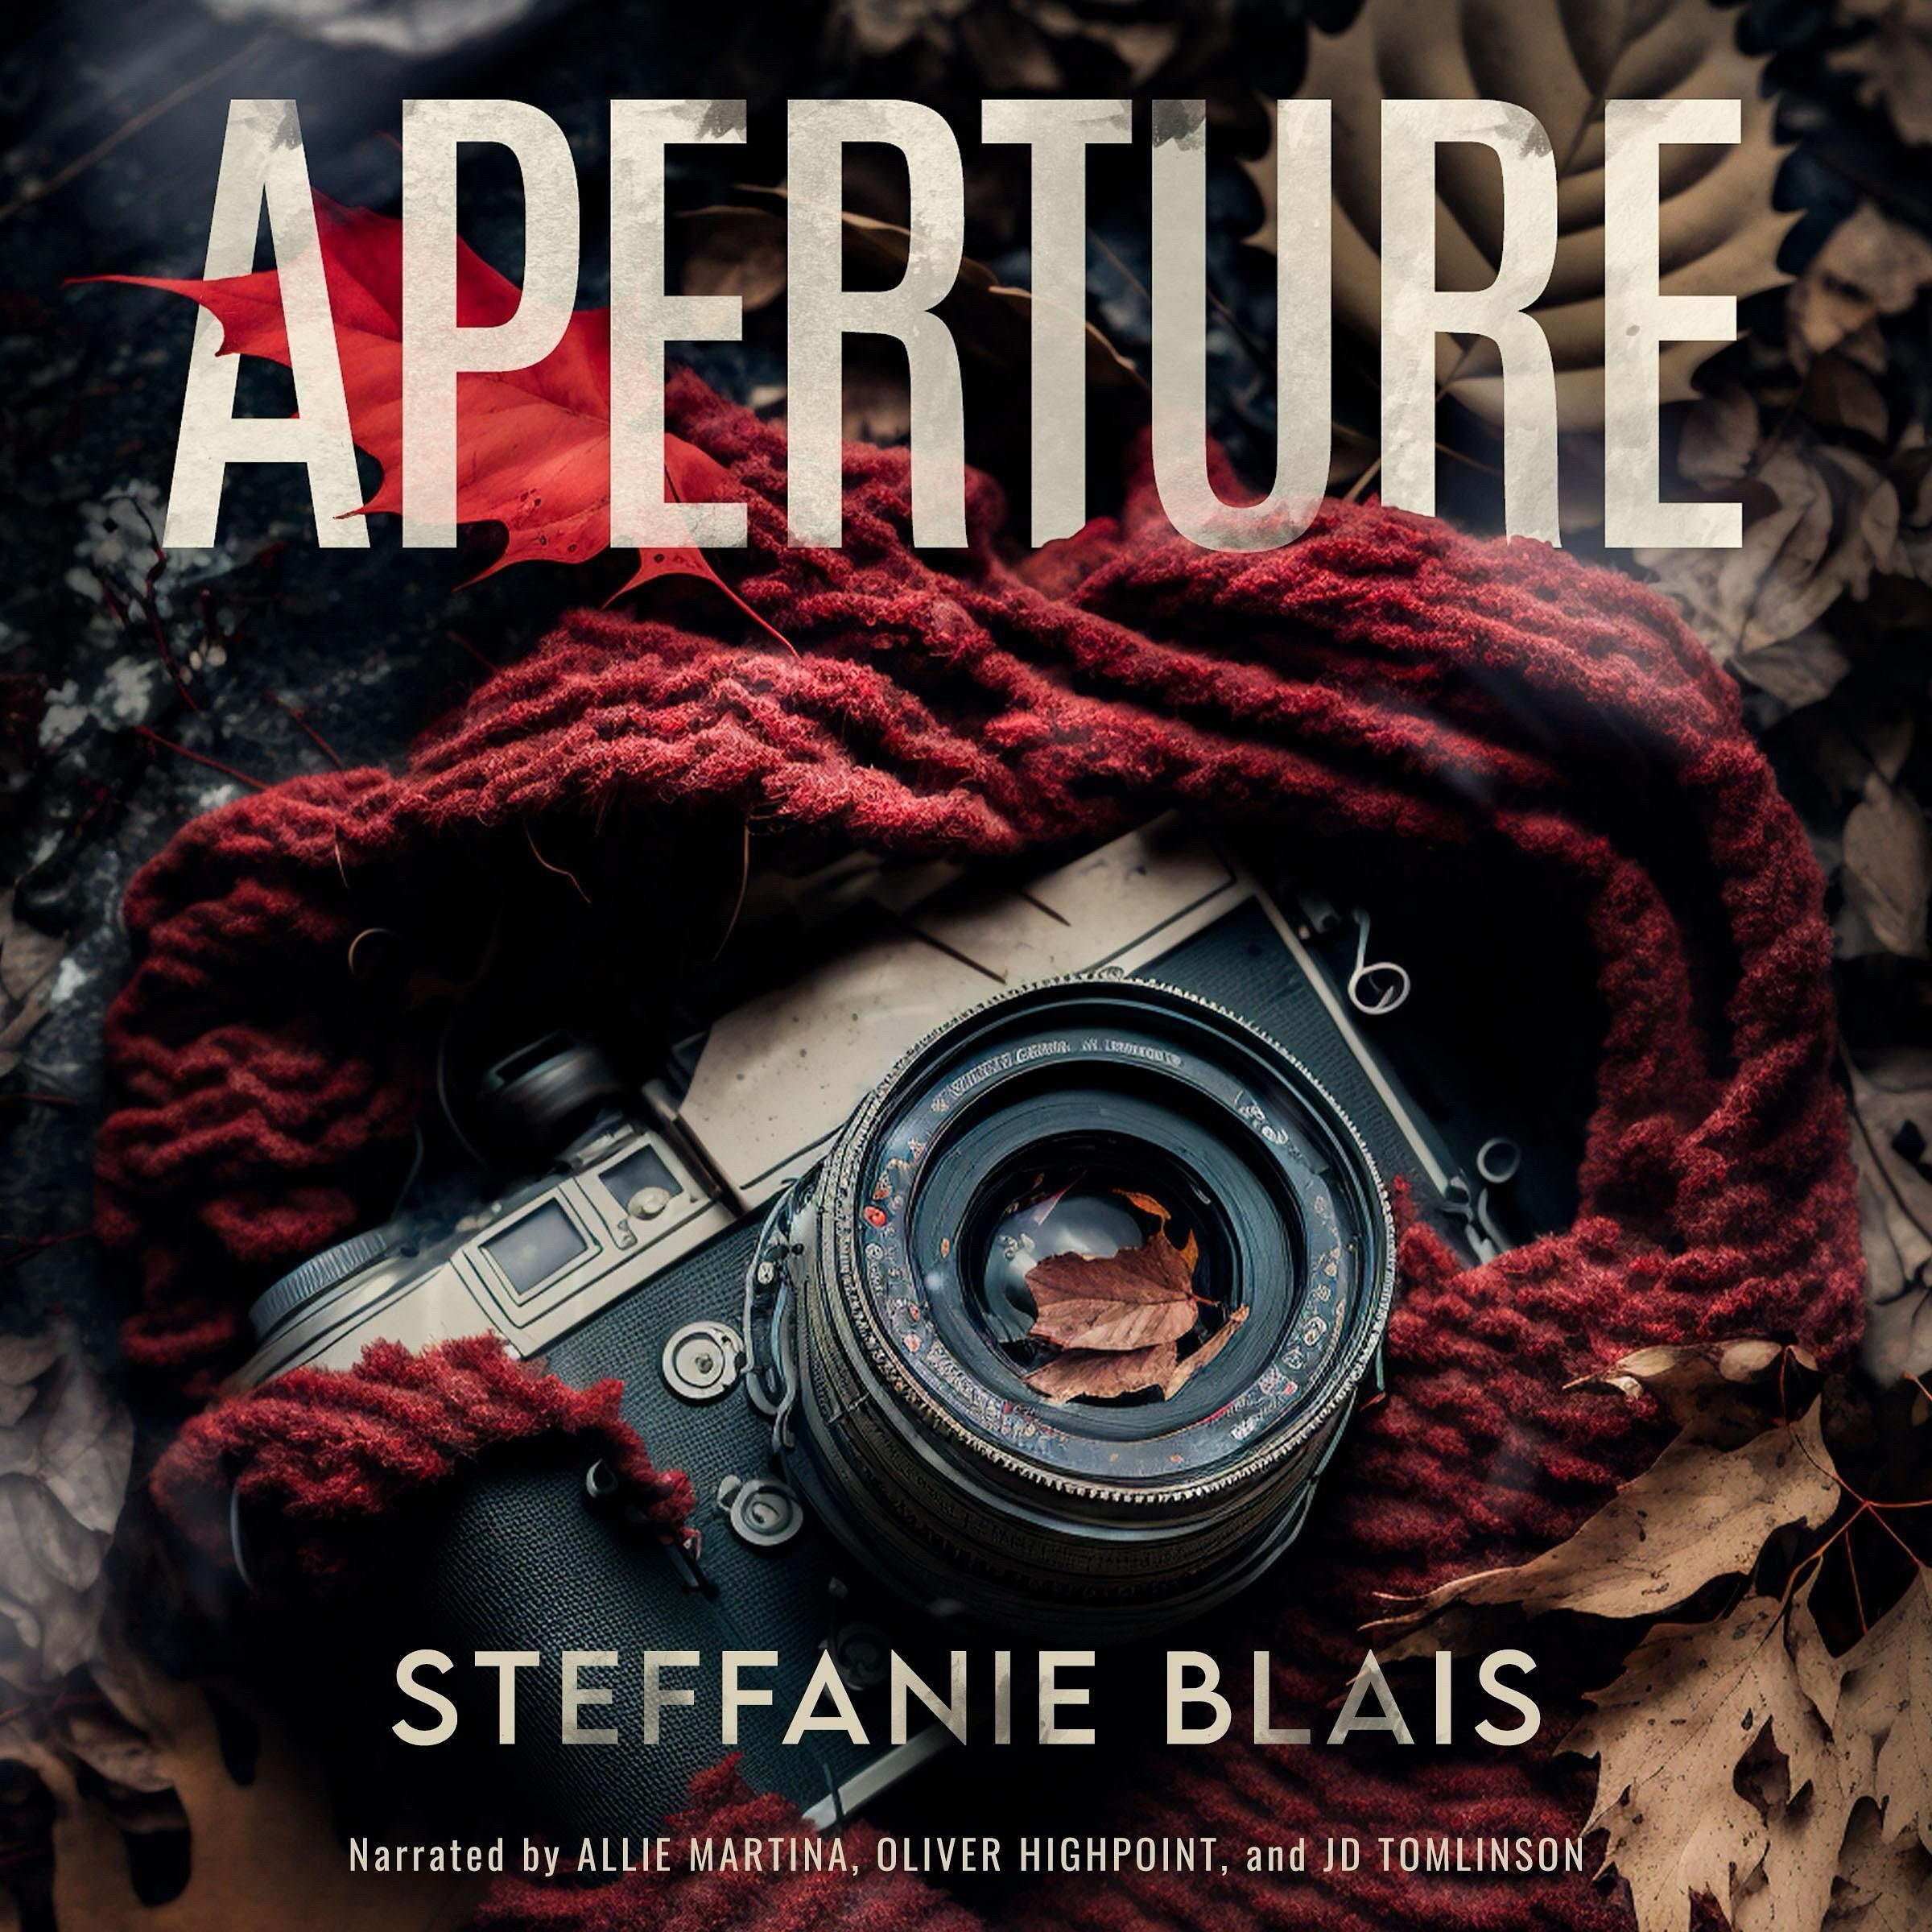 Happy release day!!! 📚🎙🎧

&ldquo;They say you fall in love when you least expect it.&rdquo;

Aperture is now available in audio! Written by @author_steffanieblais, narrated by @allie.martina.narrator, @oliverhighpoint and @xojdtomlinson. 

Congrat